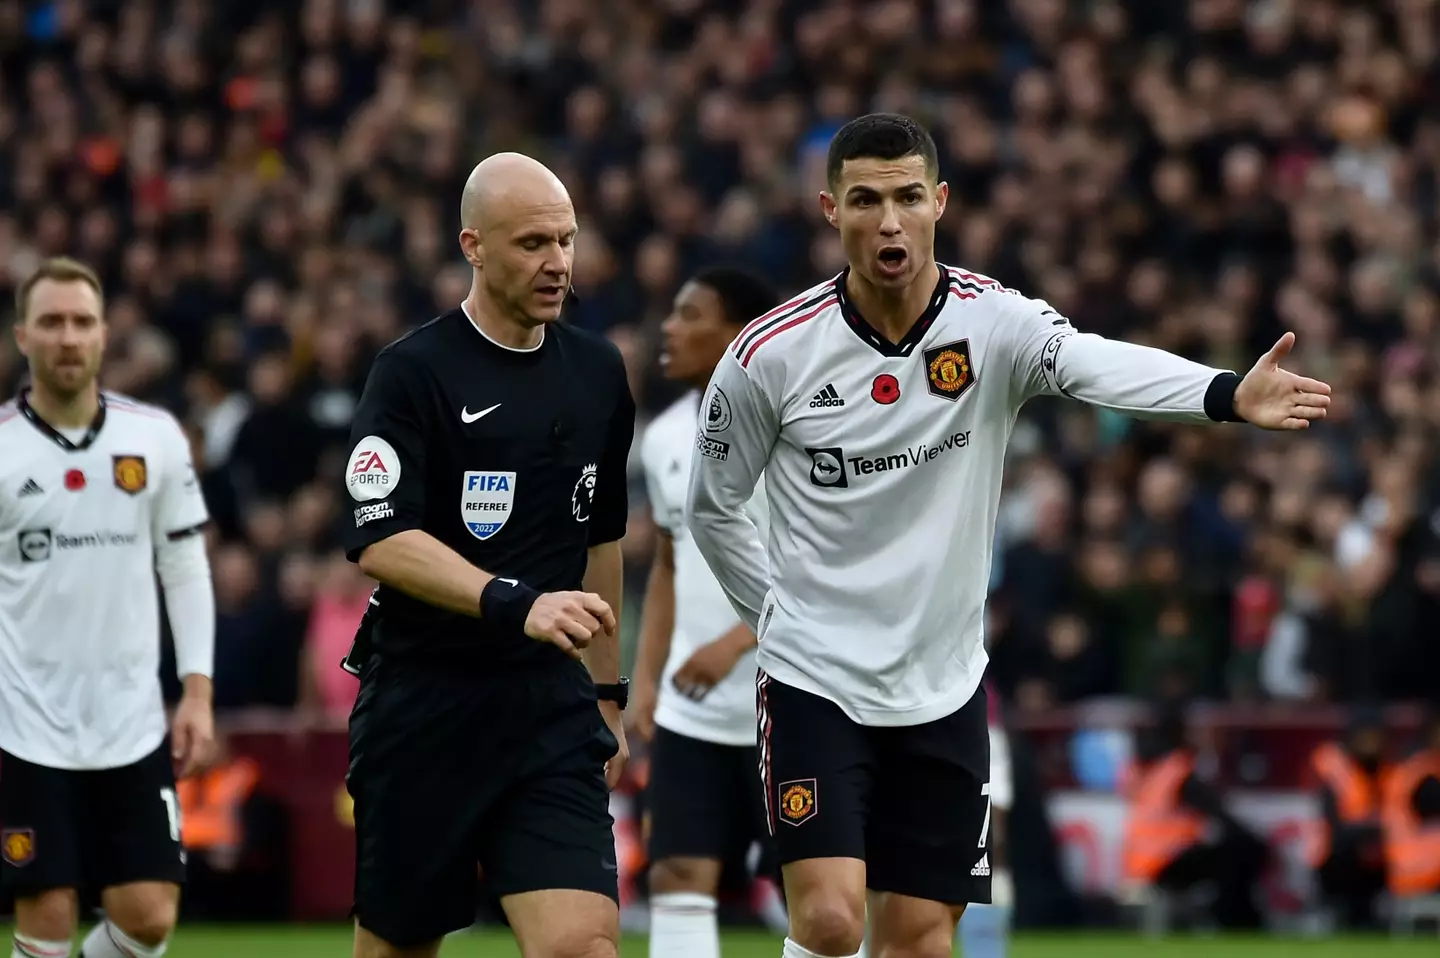 Anthony Taylor was confronted by Cristiano Ronaldo. (Image